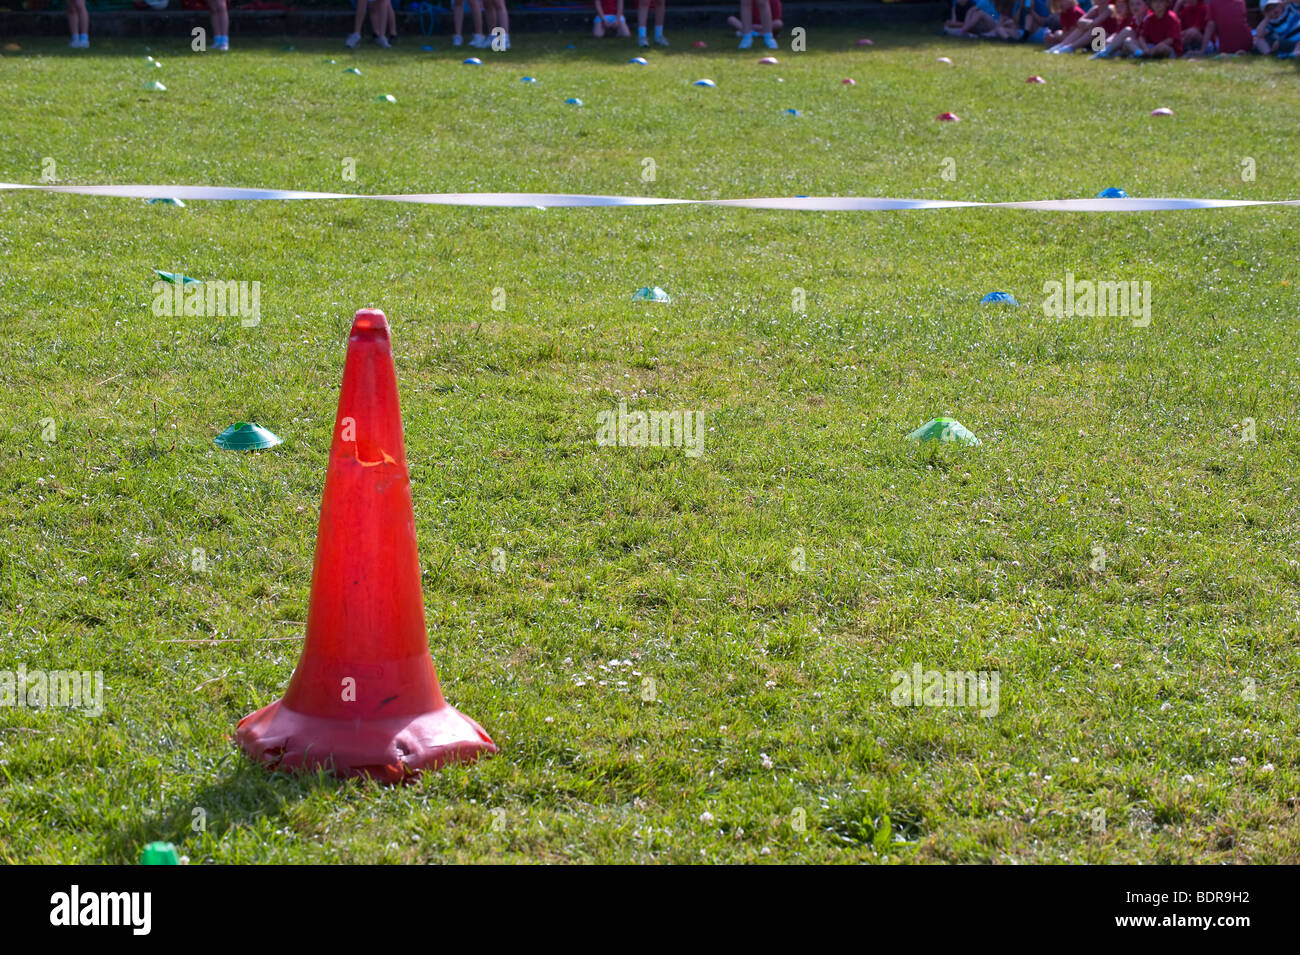 Finishing line at primary school sports day Stock Photo